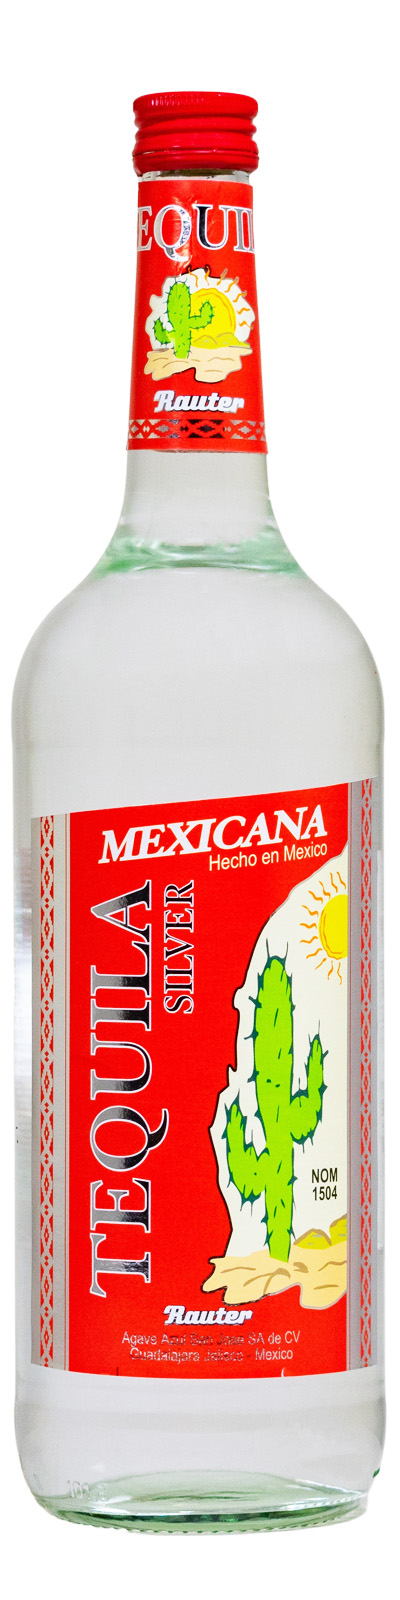 Tequila Mexicana Silver - 1 Liter 38% vol